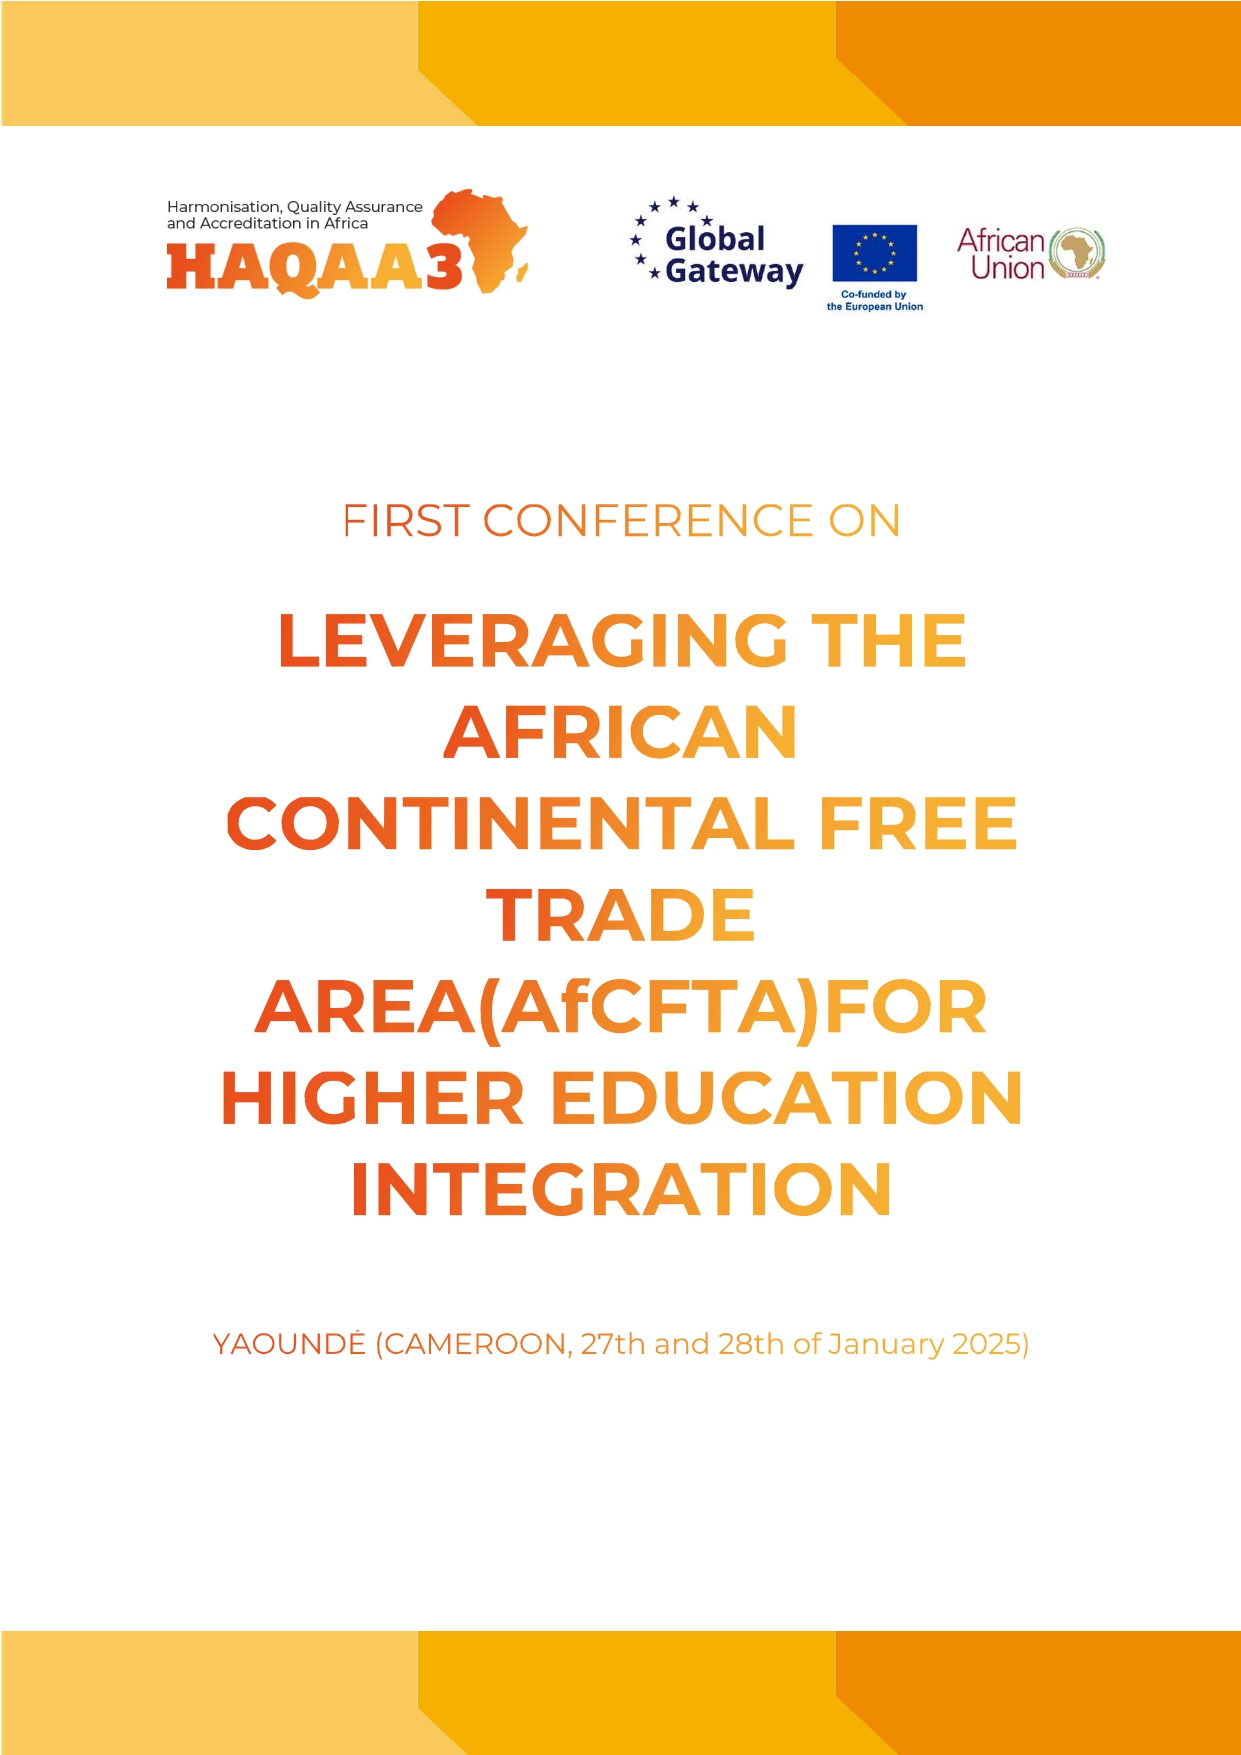 Call for Papers: First Conference on Leveraging the African Continental Free Trade Area for Higher Education Integration